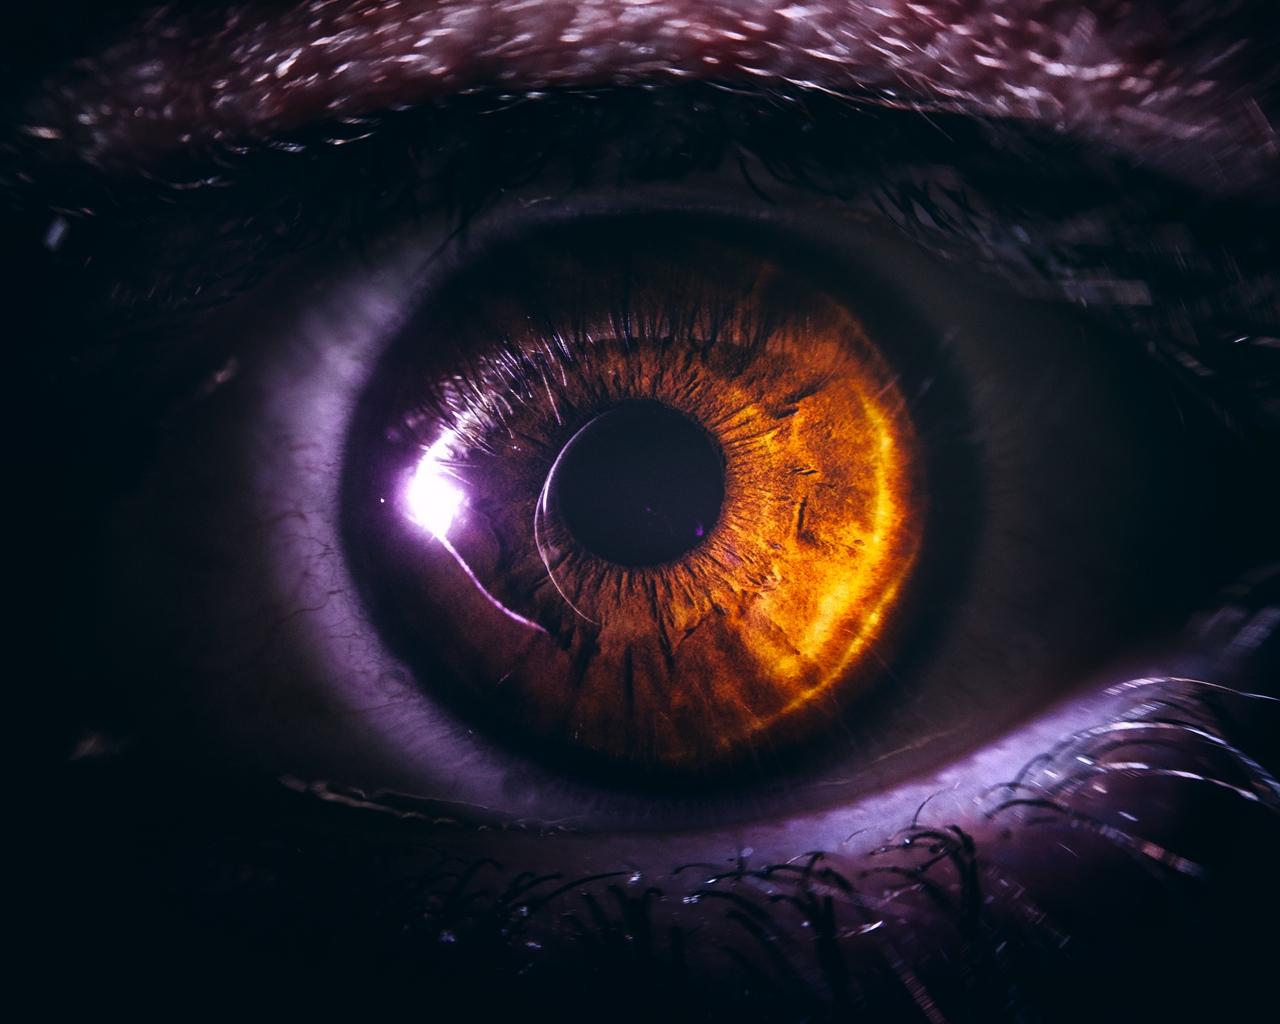 Download wallpapers 1280x1024 eye, pupil, close